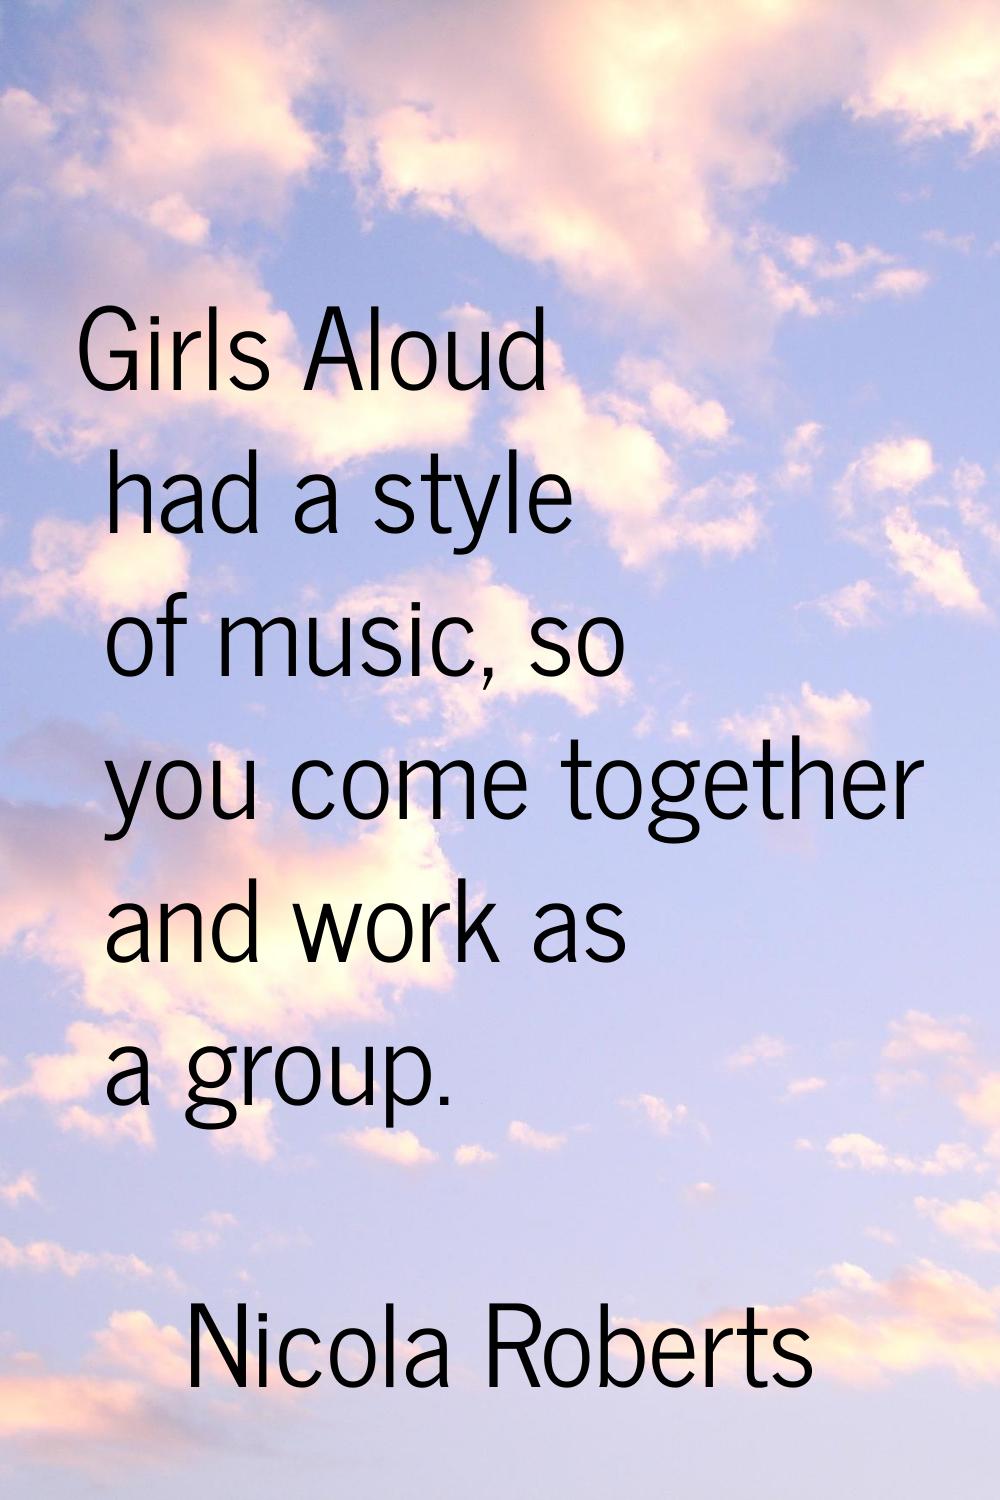 Girls Aloud had a style of music, so you come together and work as a group.